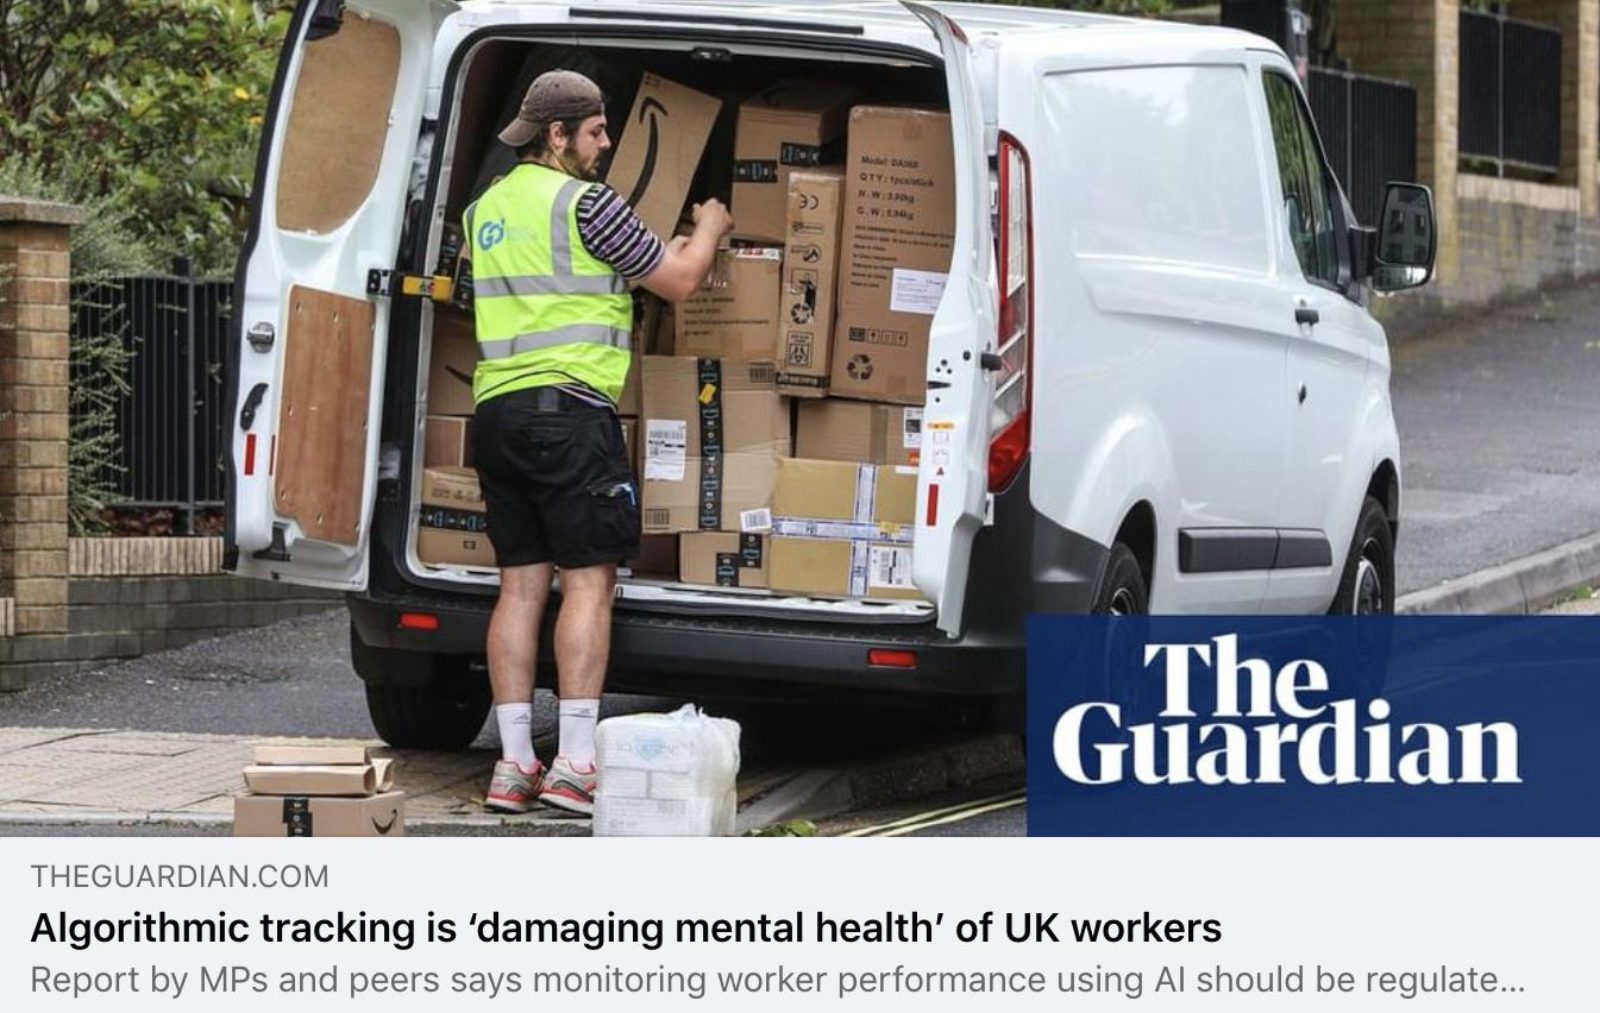 Image shows a Guardian new article with a delivery man loading boxes into a van